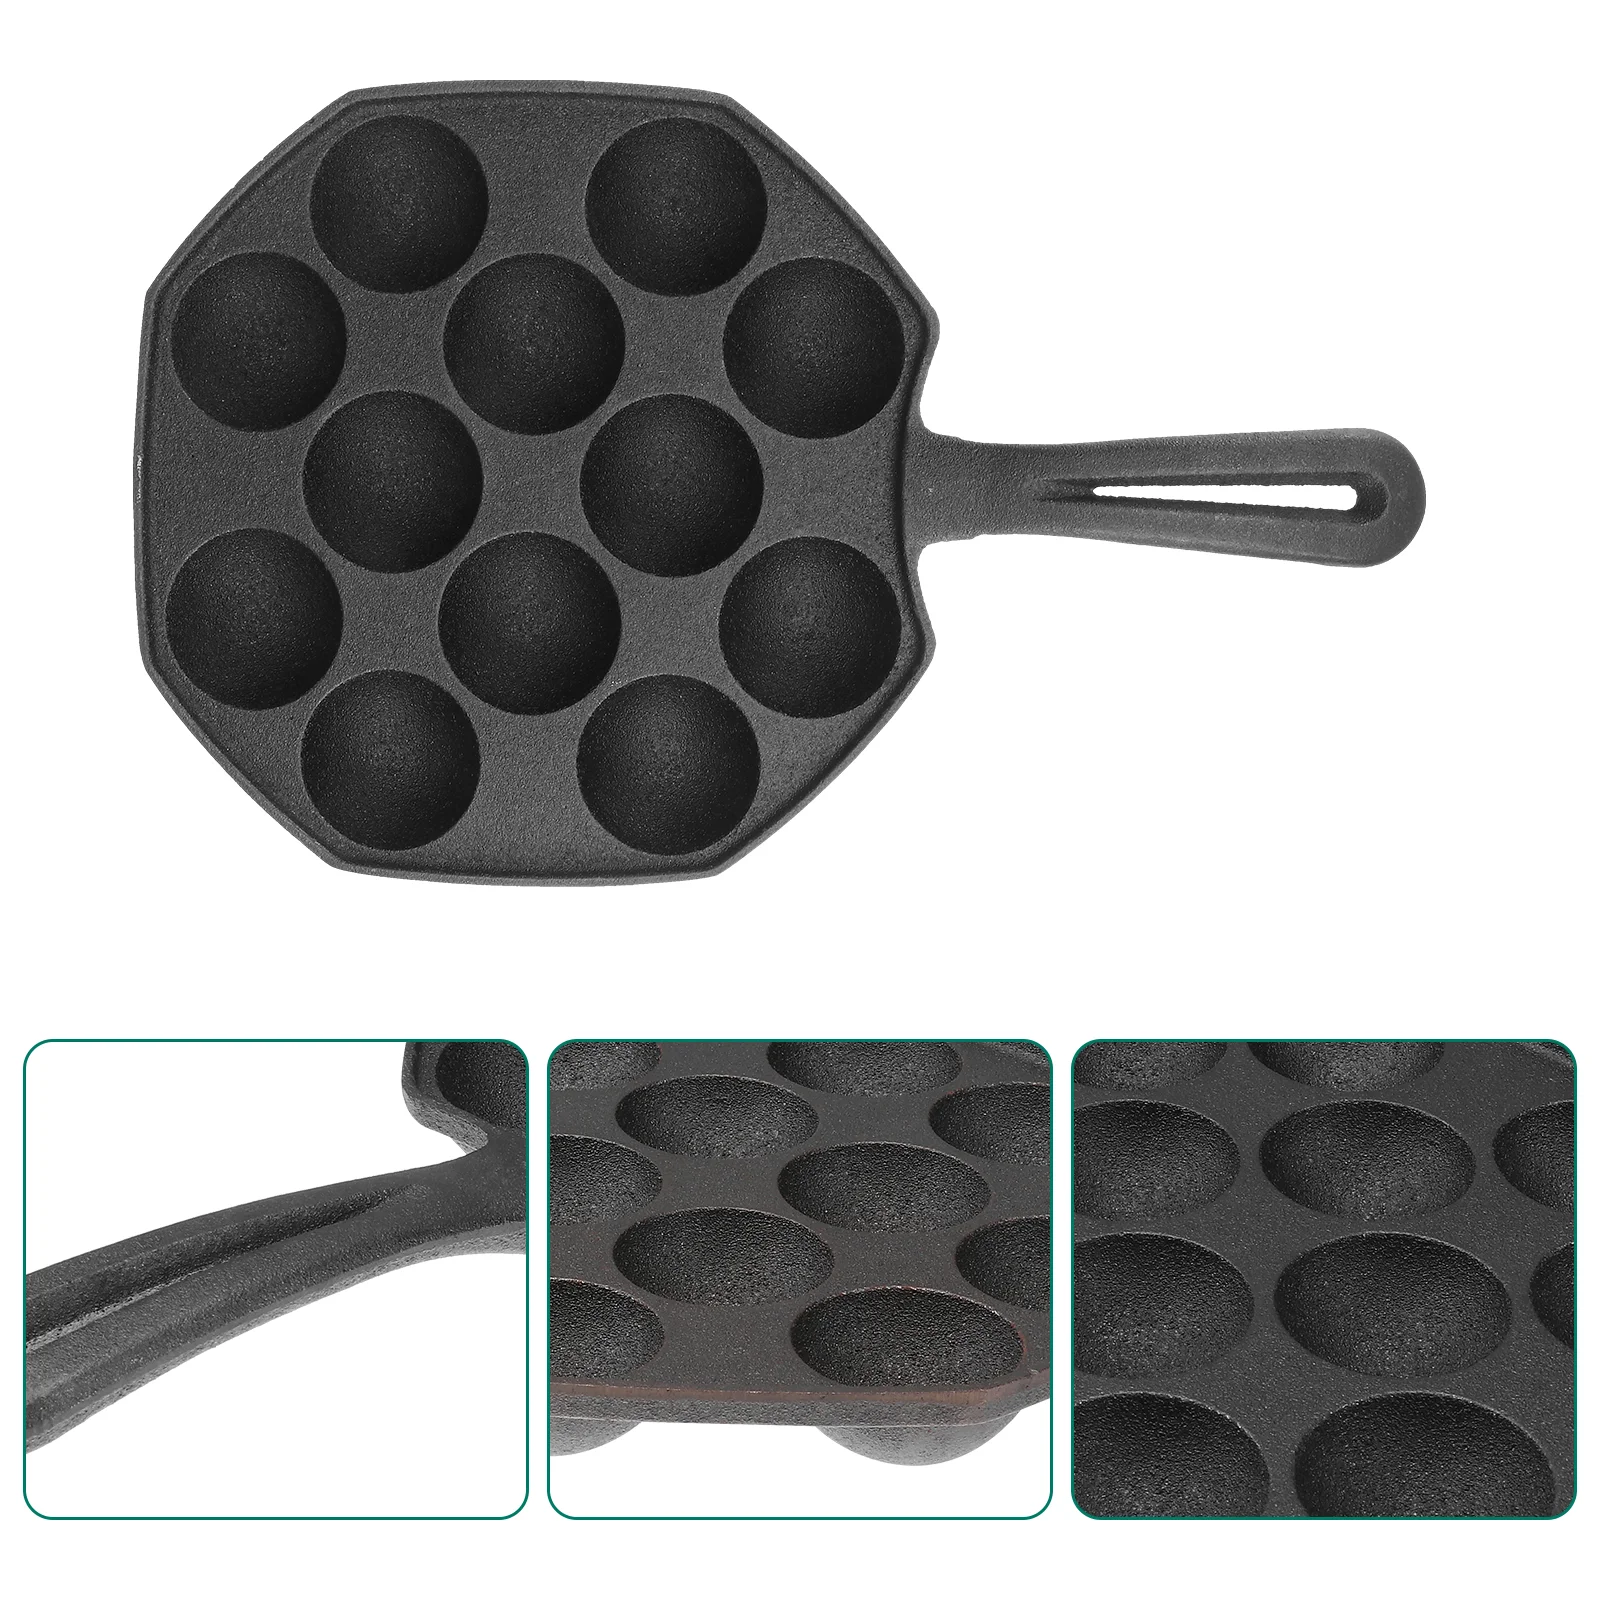 

Cavities Takoyaki Maker Grill Pan Molds Cast Iron Octopus Ball Plate Non-stick Baking Forms Mold Tray Kitchen Cooking Tools